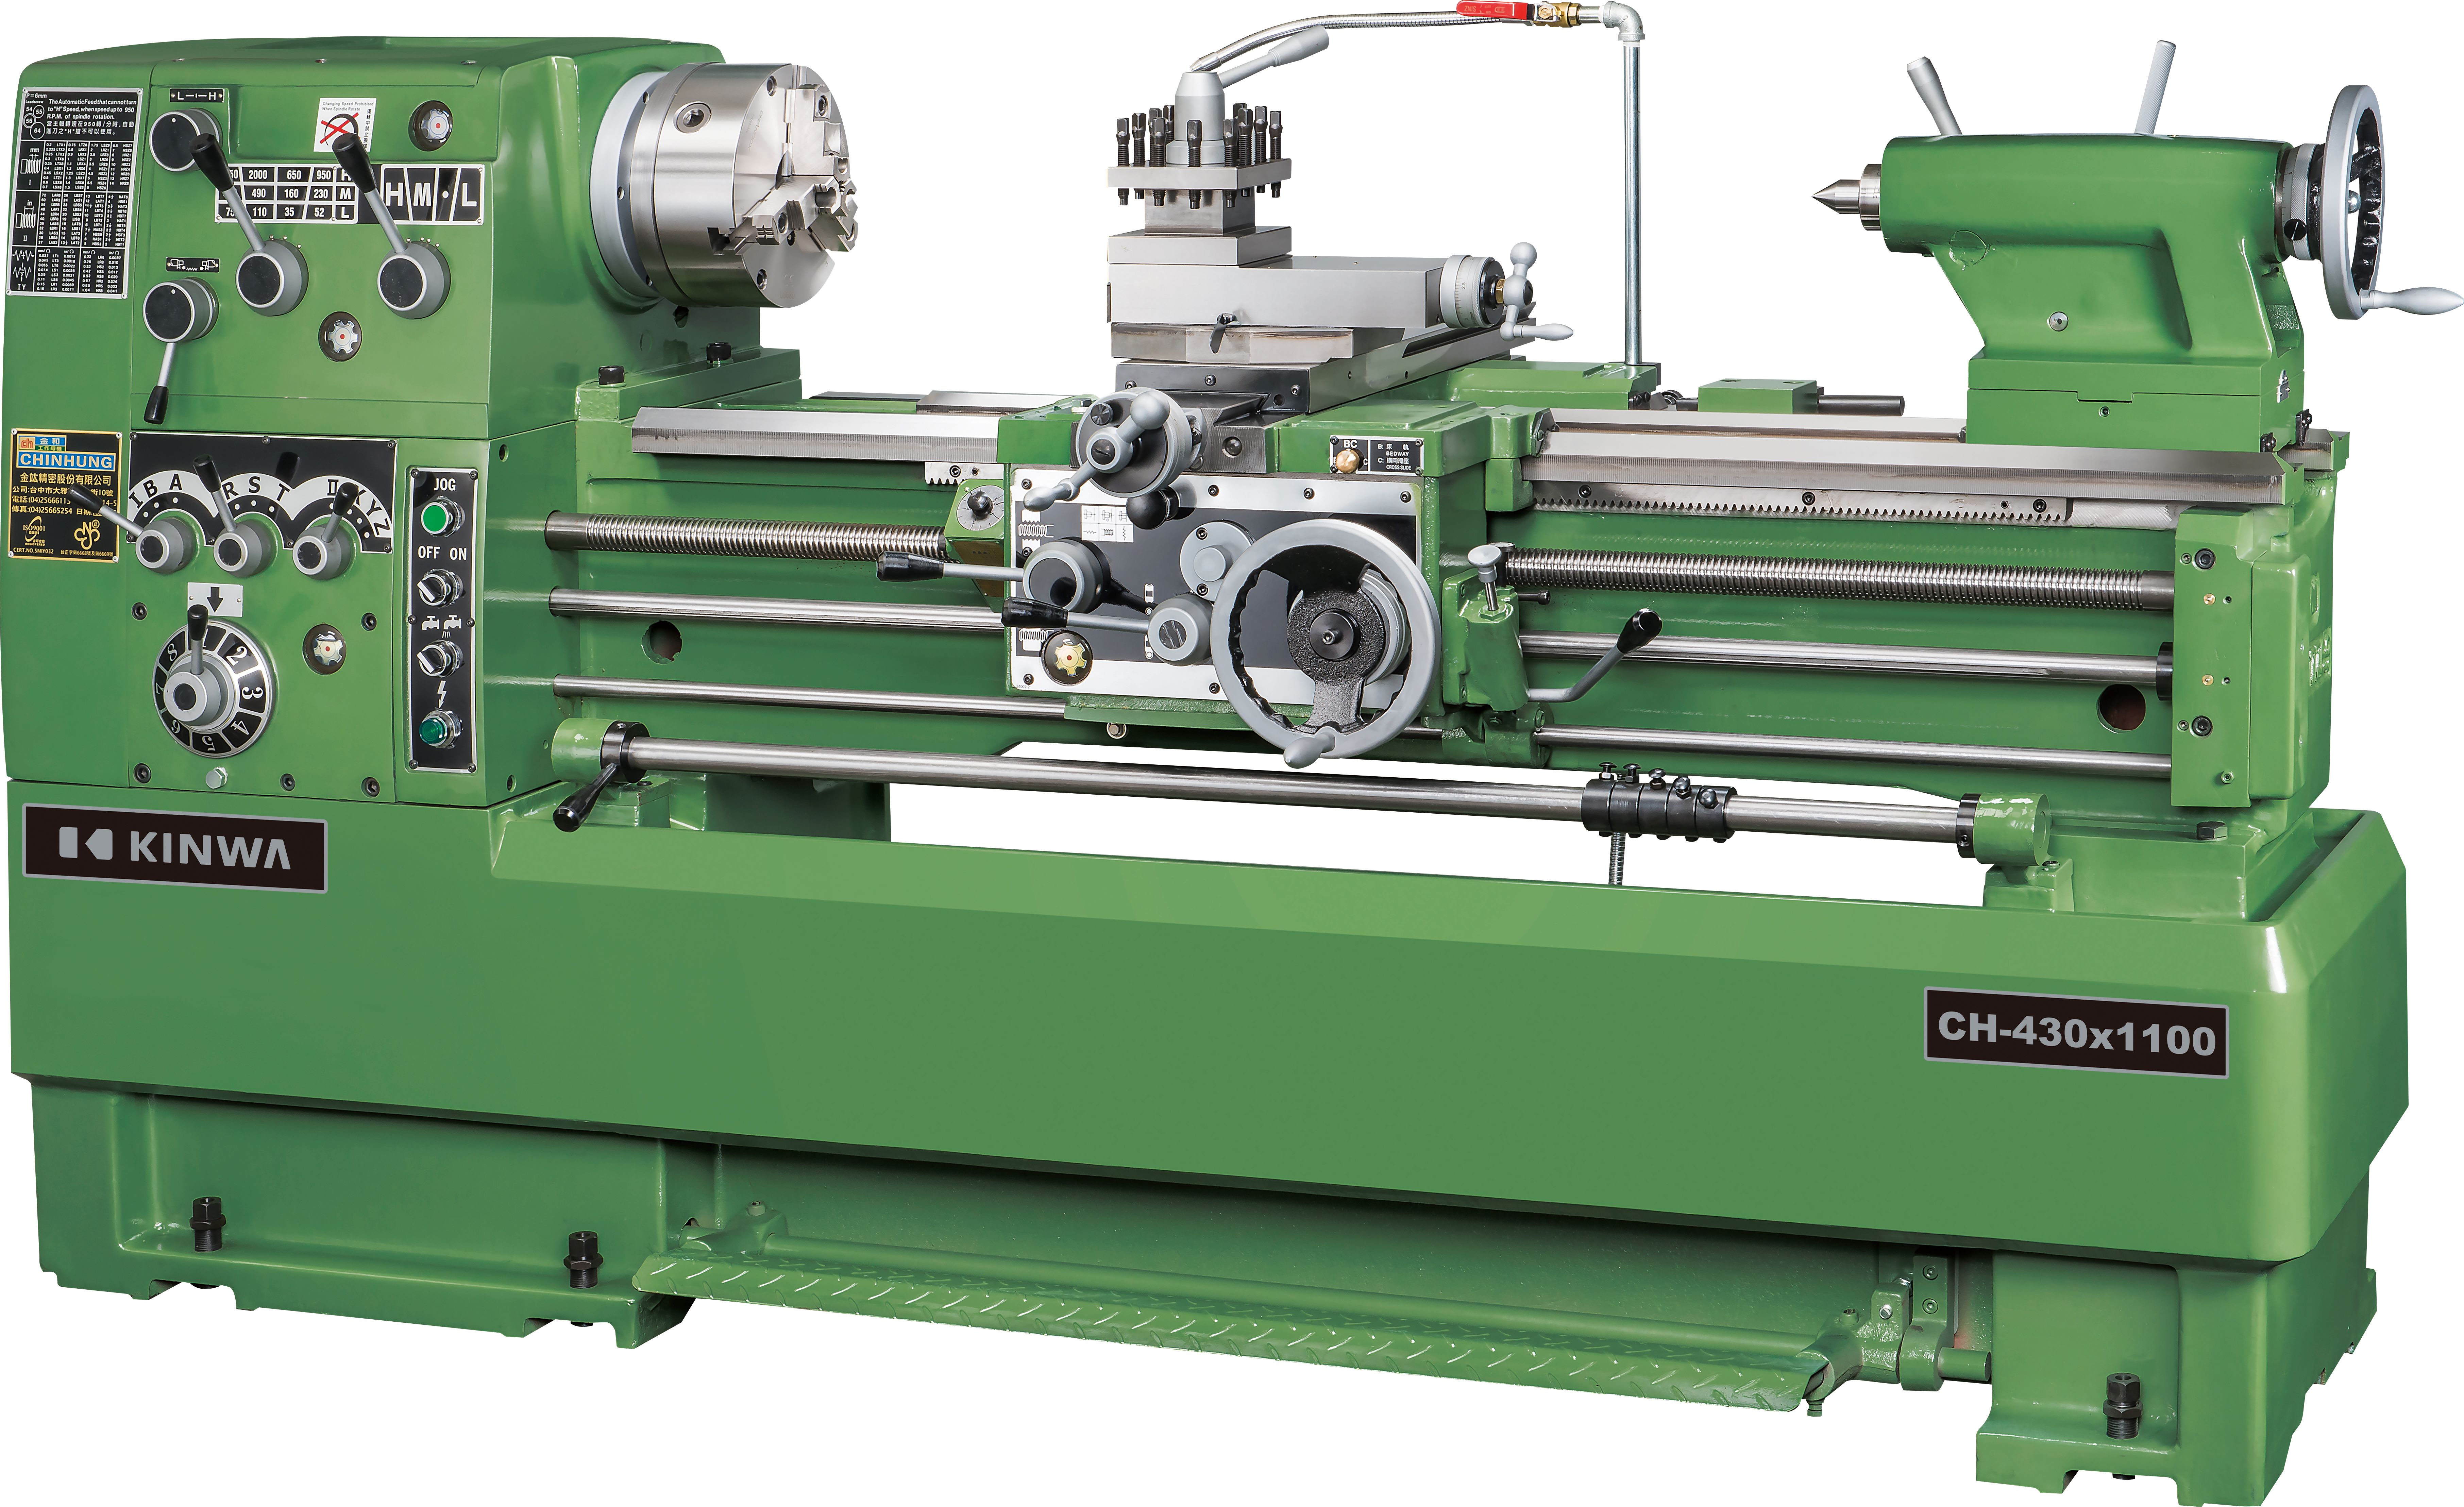 Products|High Speed Precision Lathe CH-400 / CH-430 / CH-530